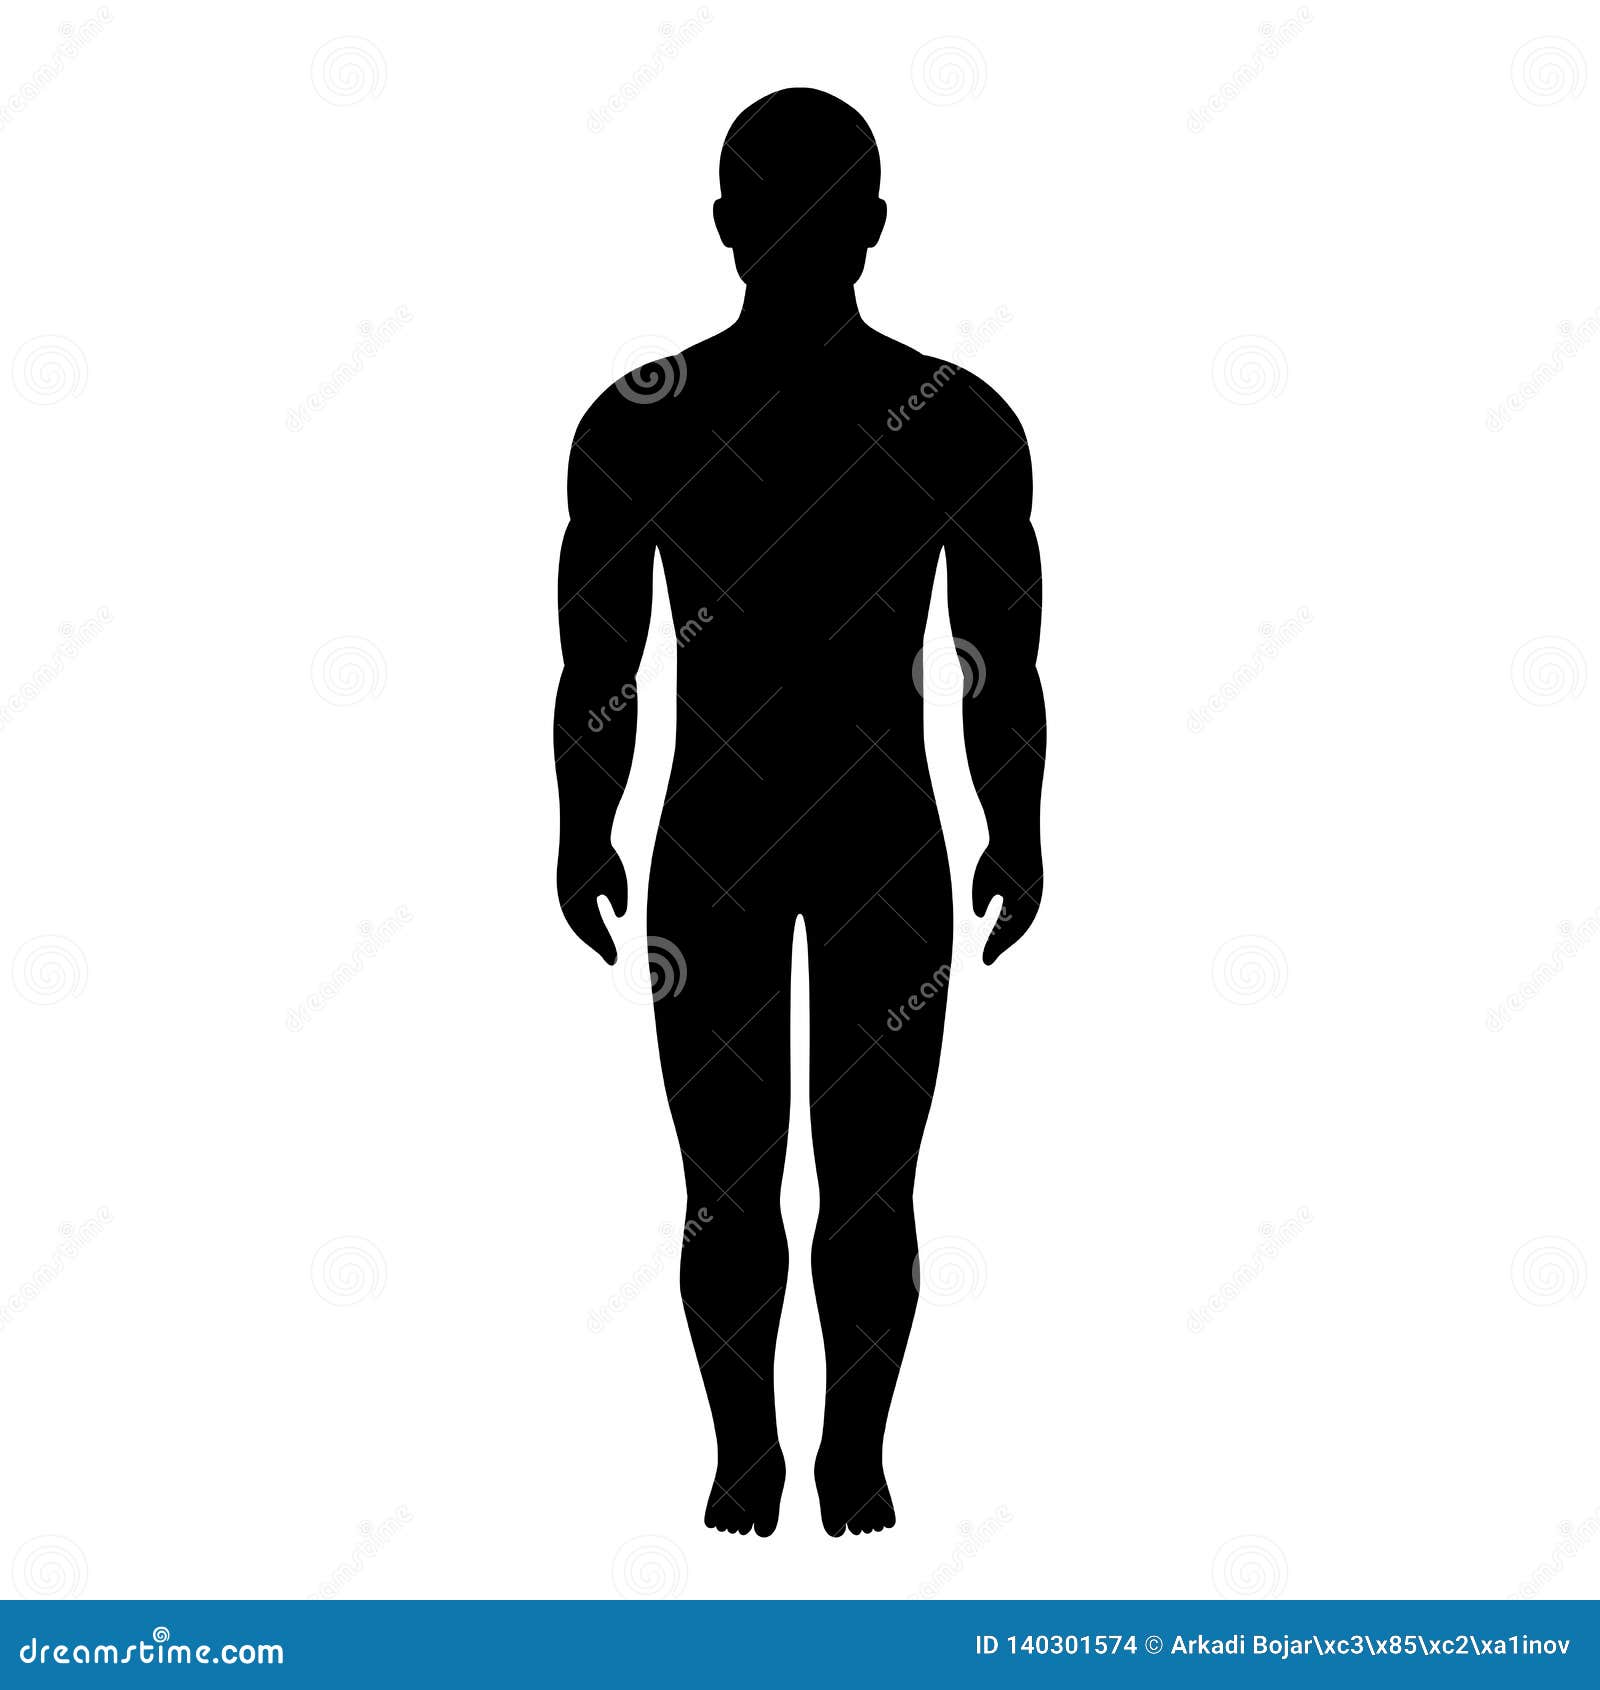 Human Body Silhouette Vector Icon Stock Vector - Illustration of icons,  athlete: 140301574